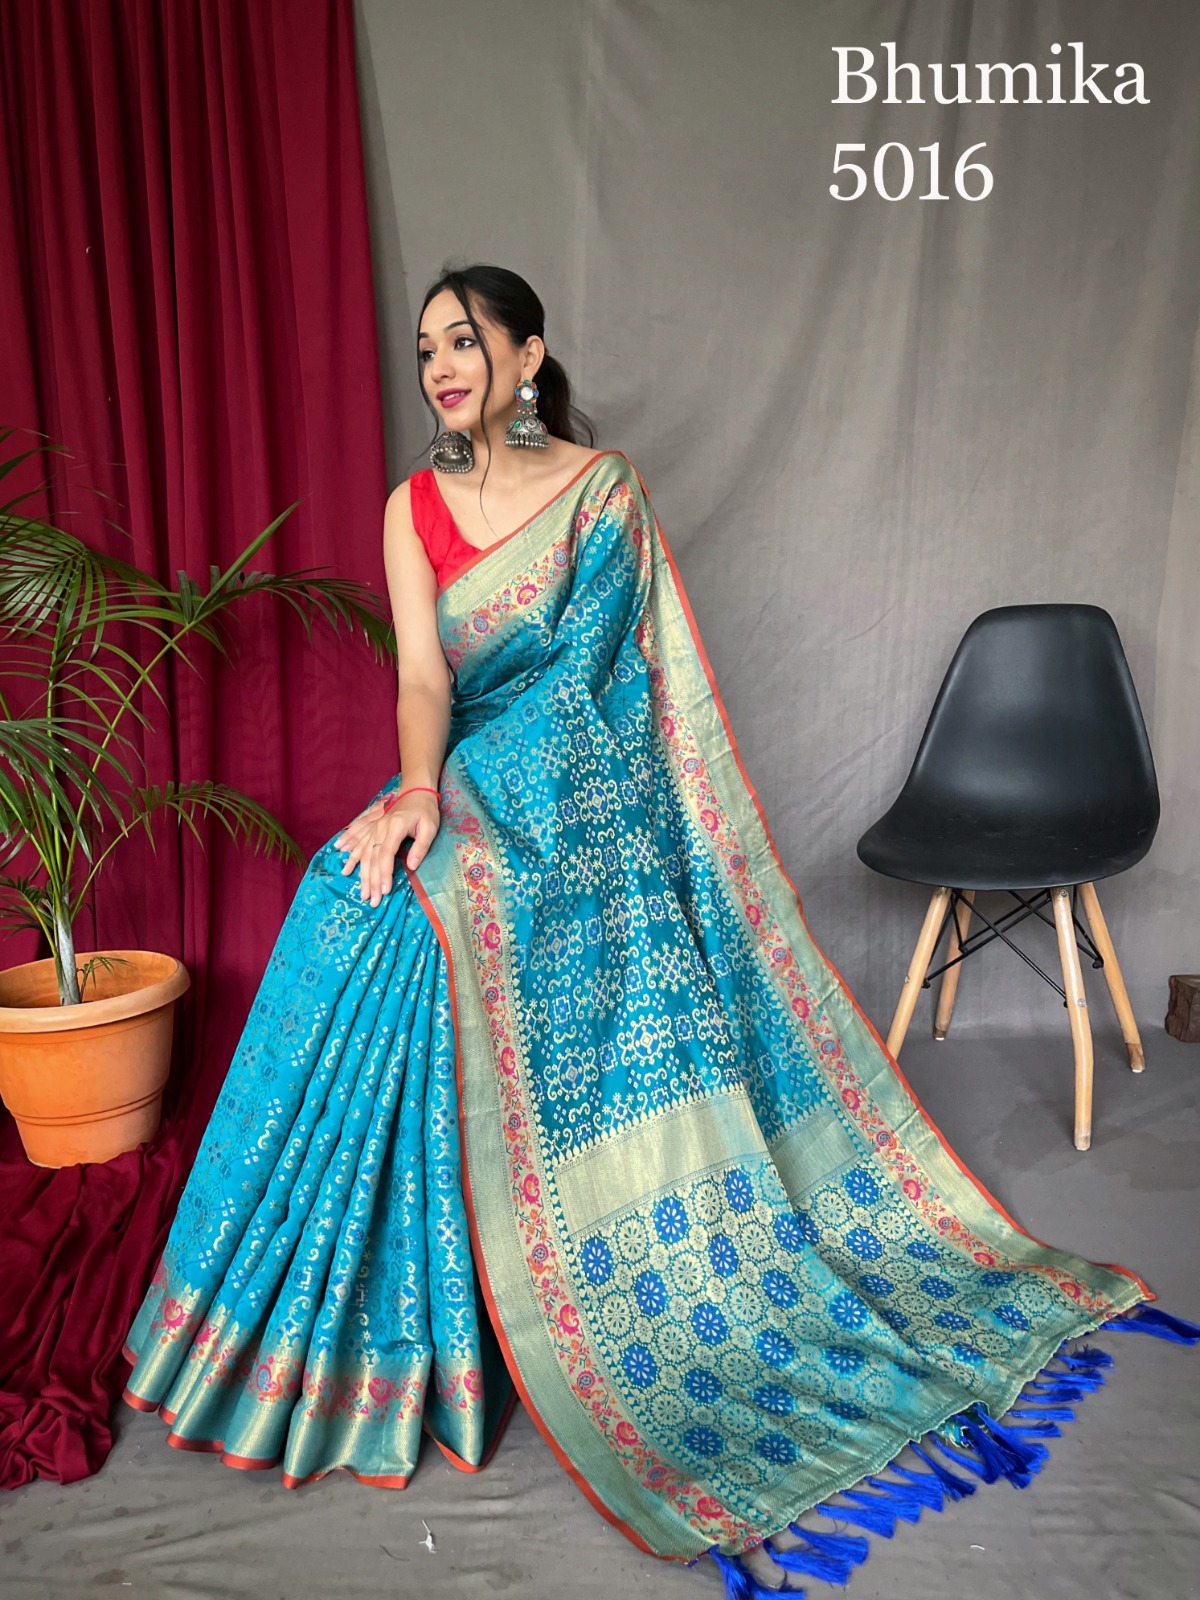 What are the best saree pictures of the South Indian actress Bhoomika  Chawla? - Quora